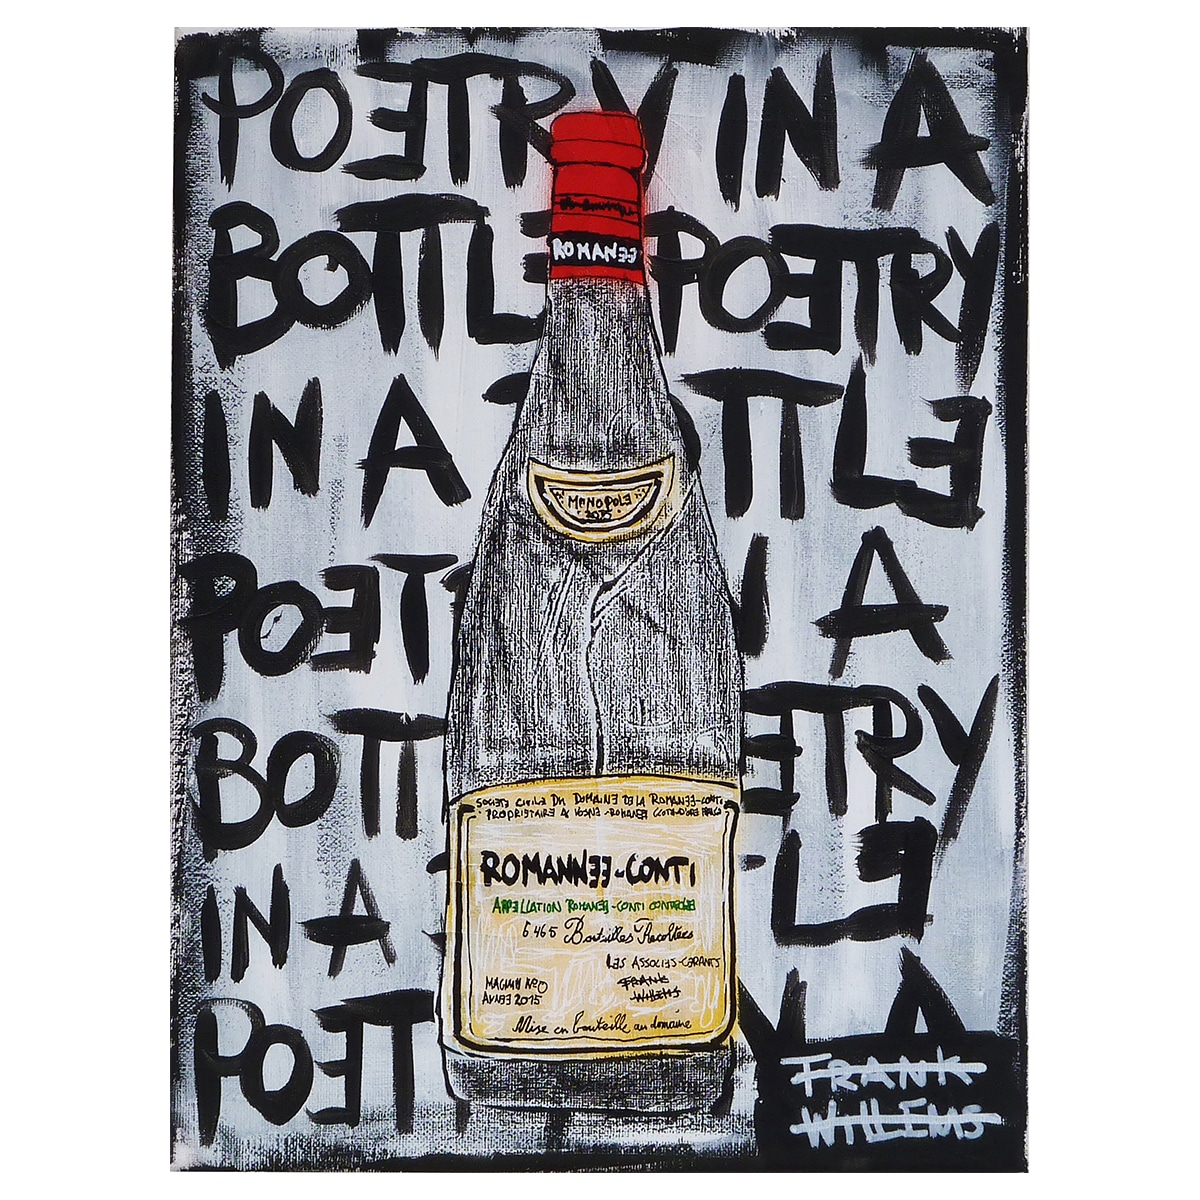 ROMANEE-CONTI - POETRY IN A BOTTLE - Frank Willems